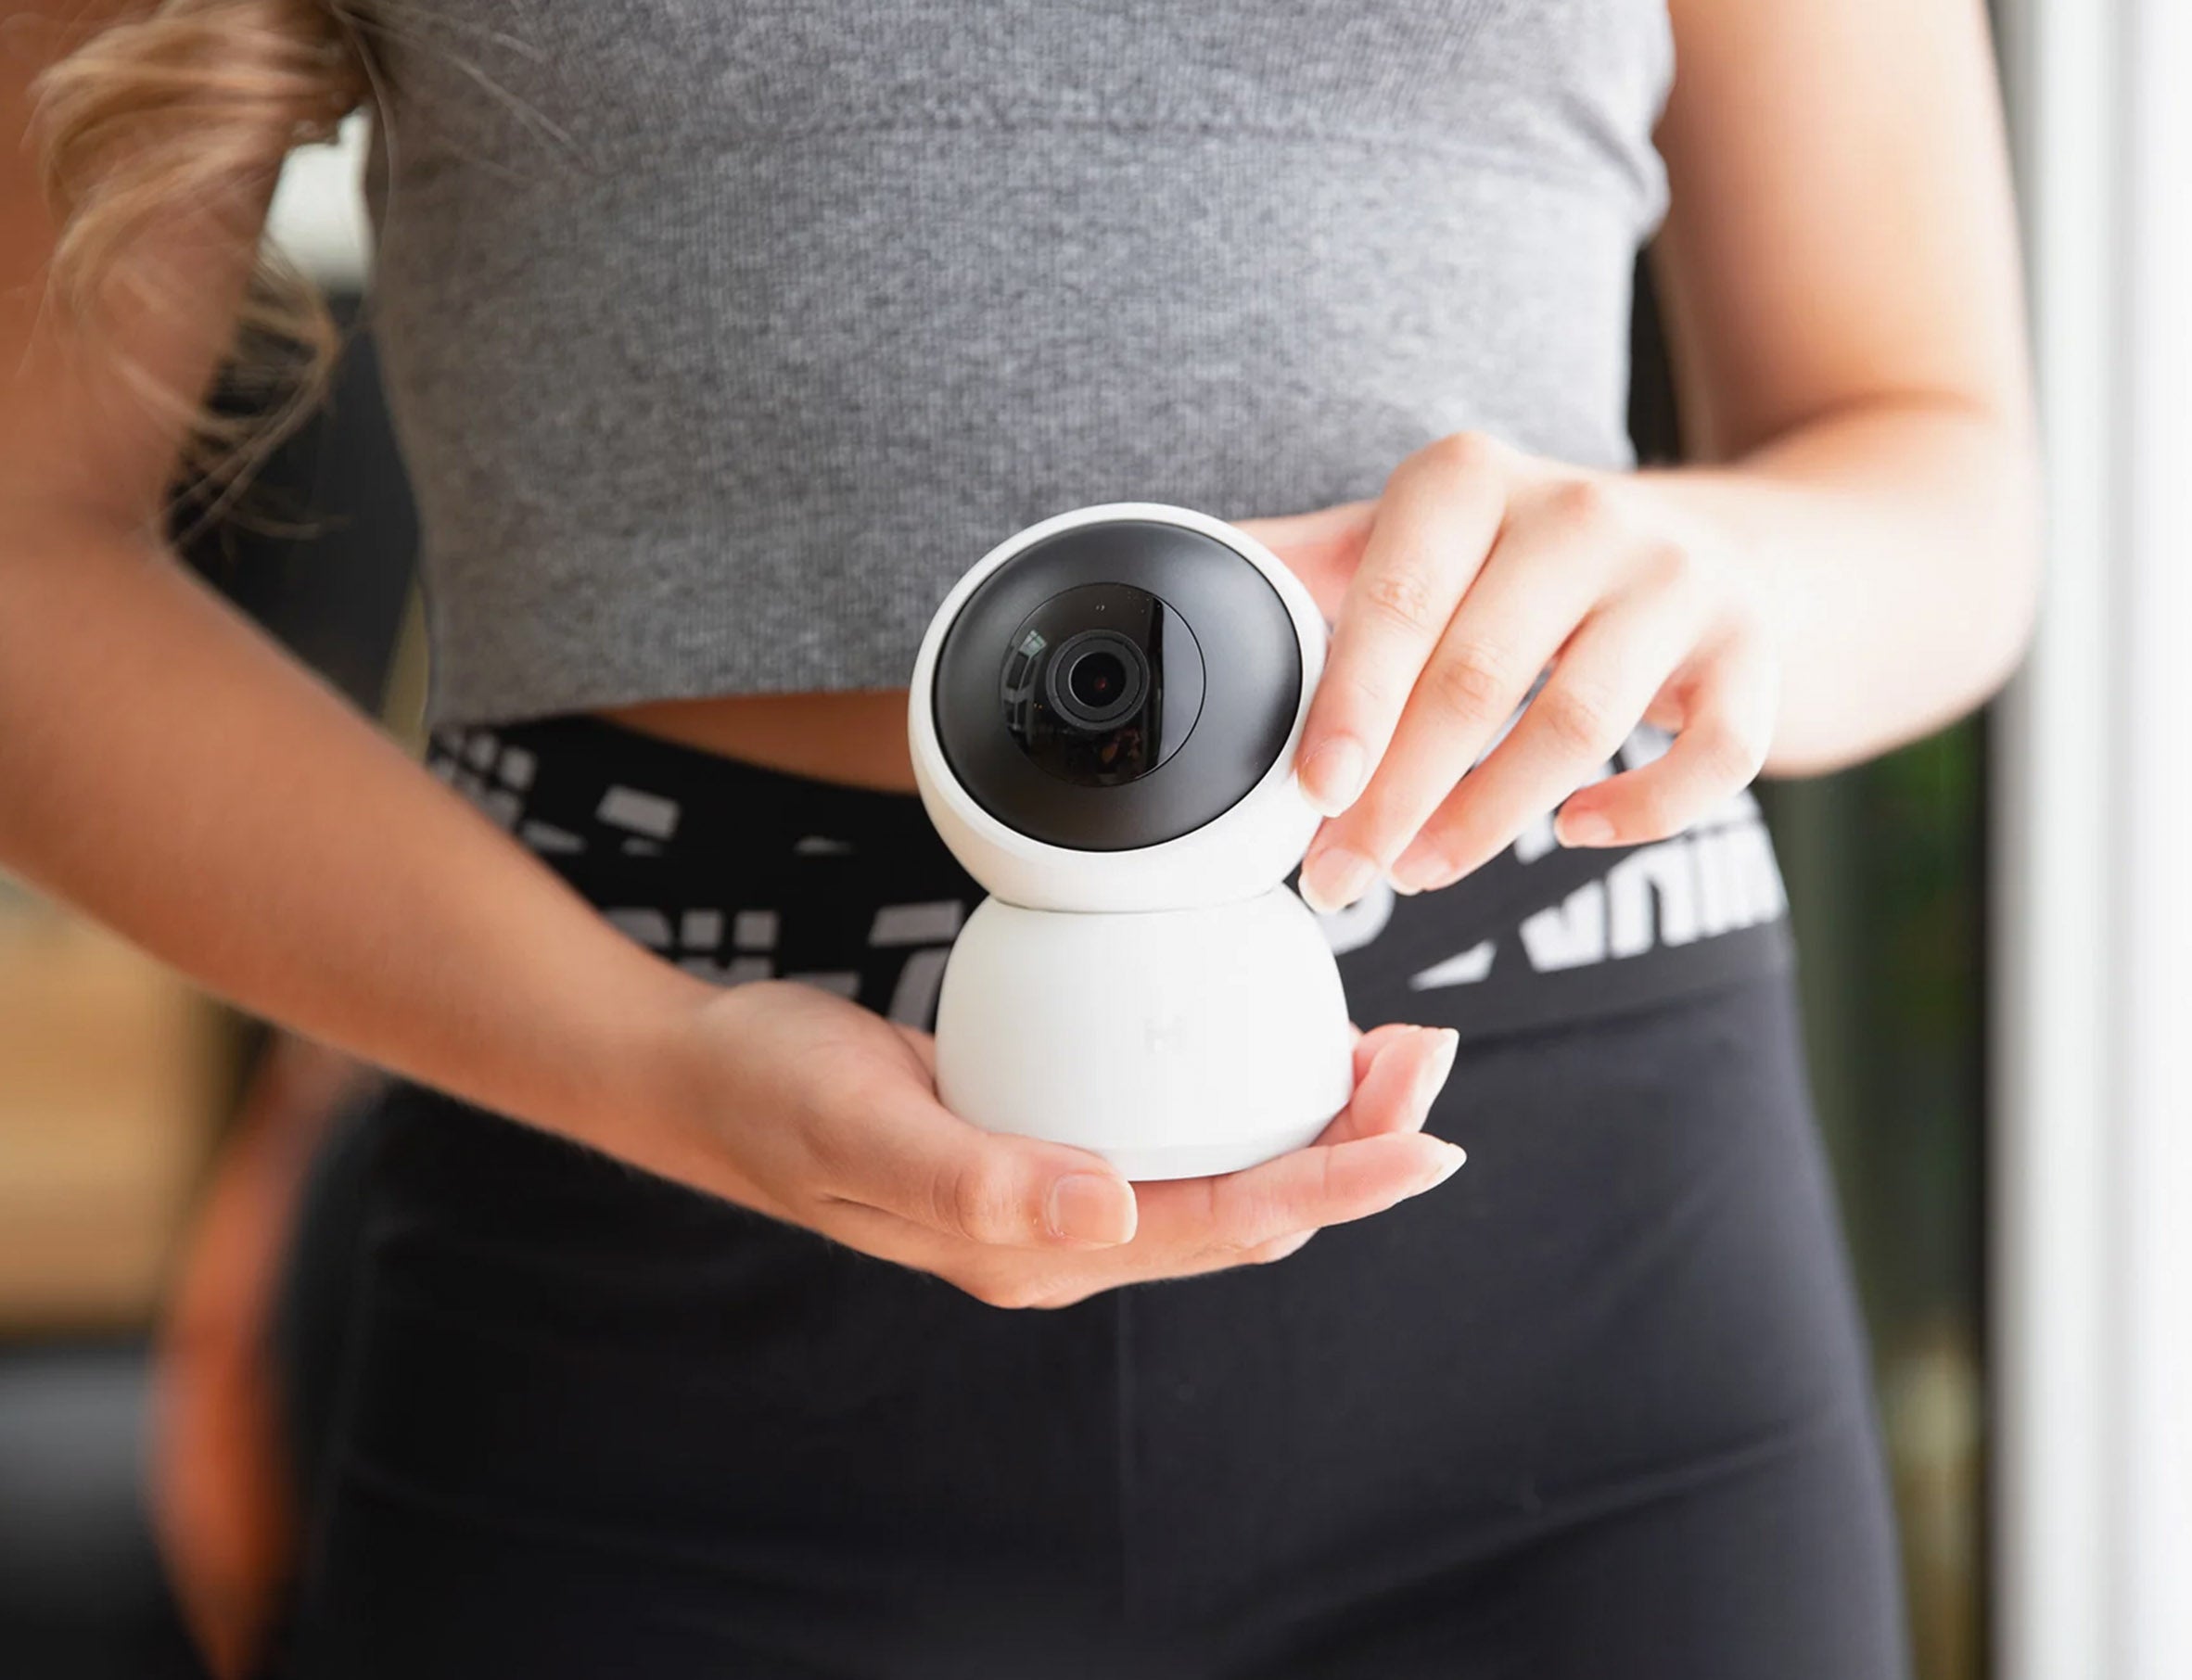 woman-holding-small-white-security-camera-a1-with-hands-in-front-of-her